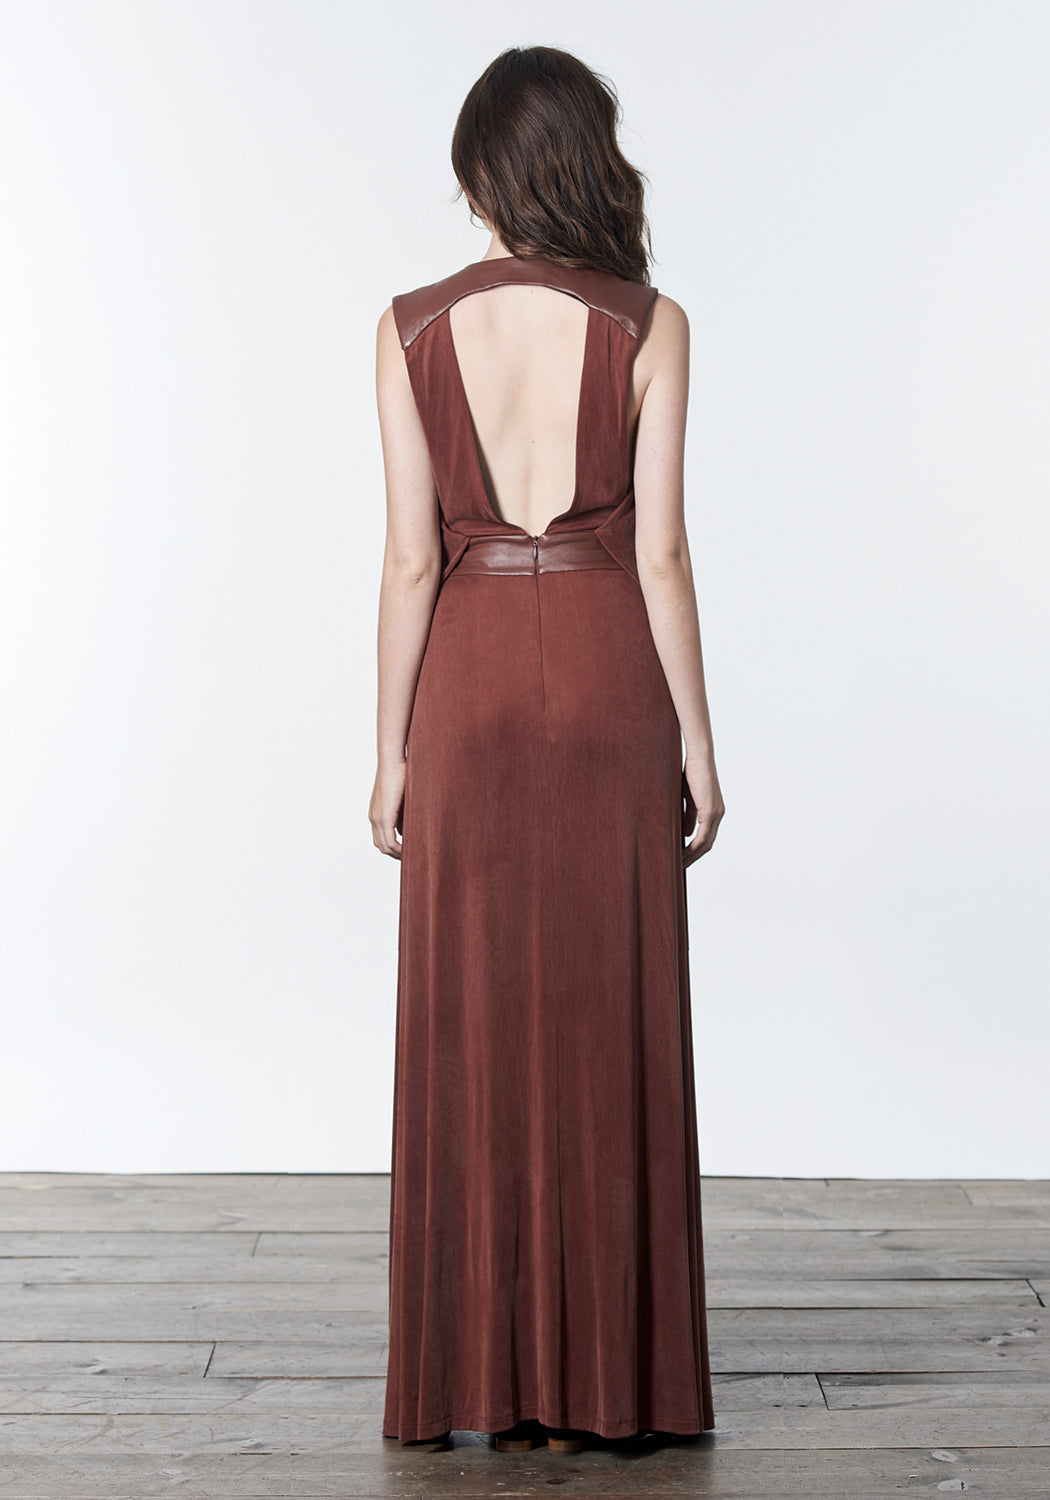 Long, winter maxi dress in brown, cognac color that can be dressed up and worn as a gown to black tie or other evening event or dressed down for daytime looks.